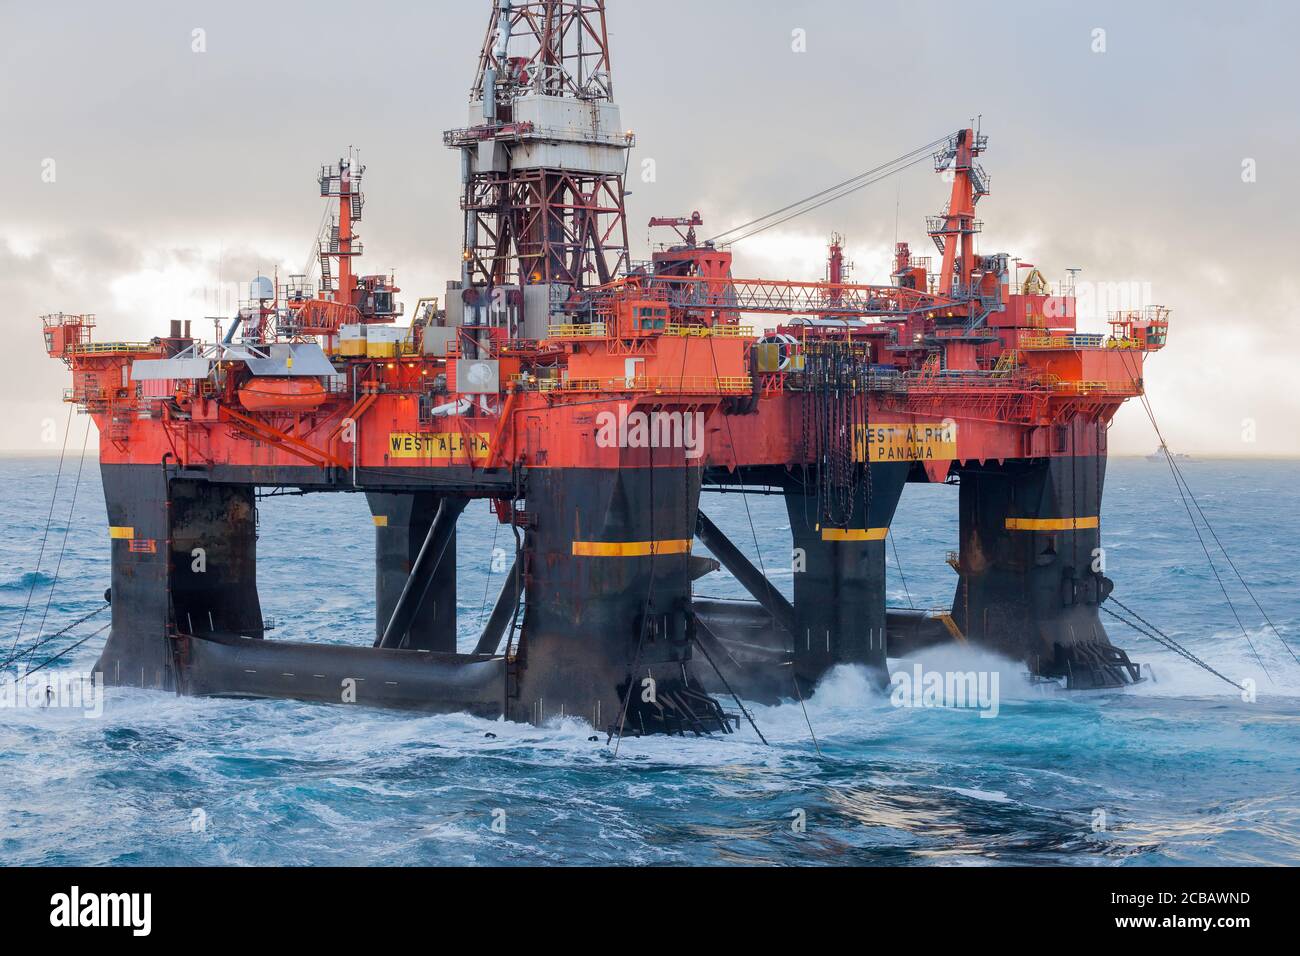 NORTH SEA, NORWAY - 2016 JANUARY 11. Semi Submersible rig West Alpha deballasting and ready for rig move in Norwegian harsh weather condition. Stock Photo